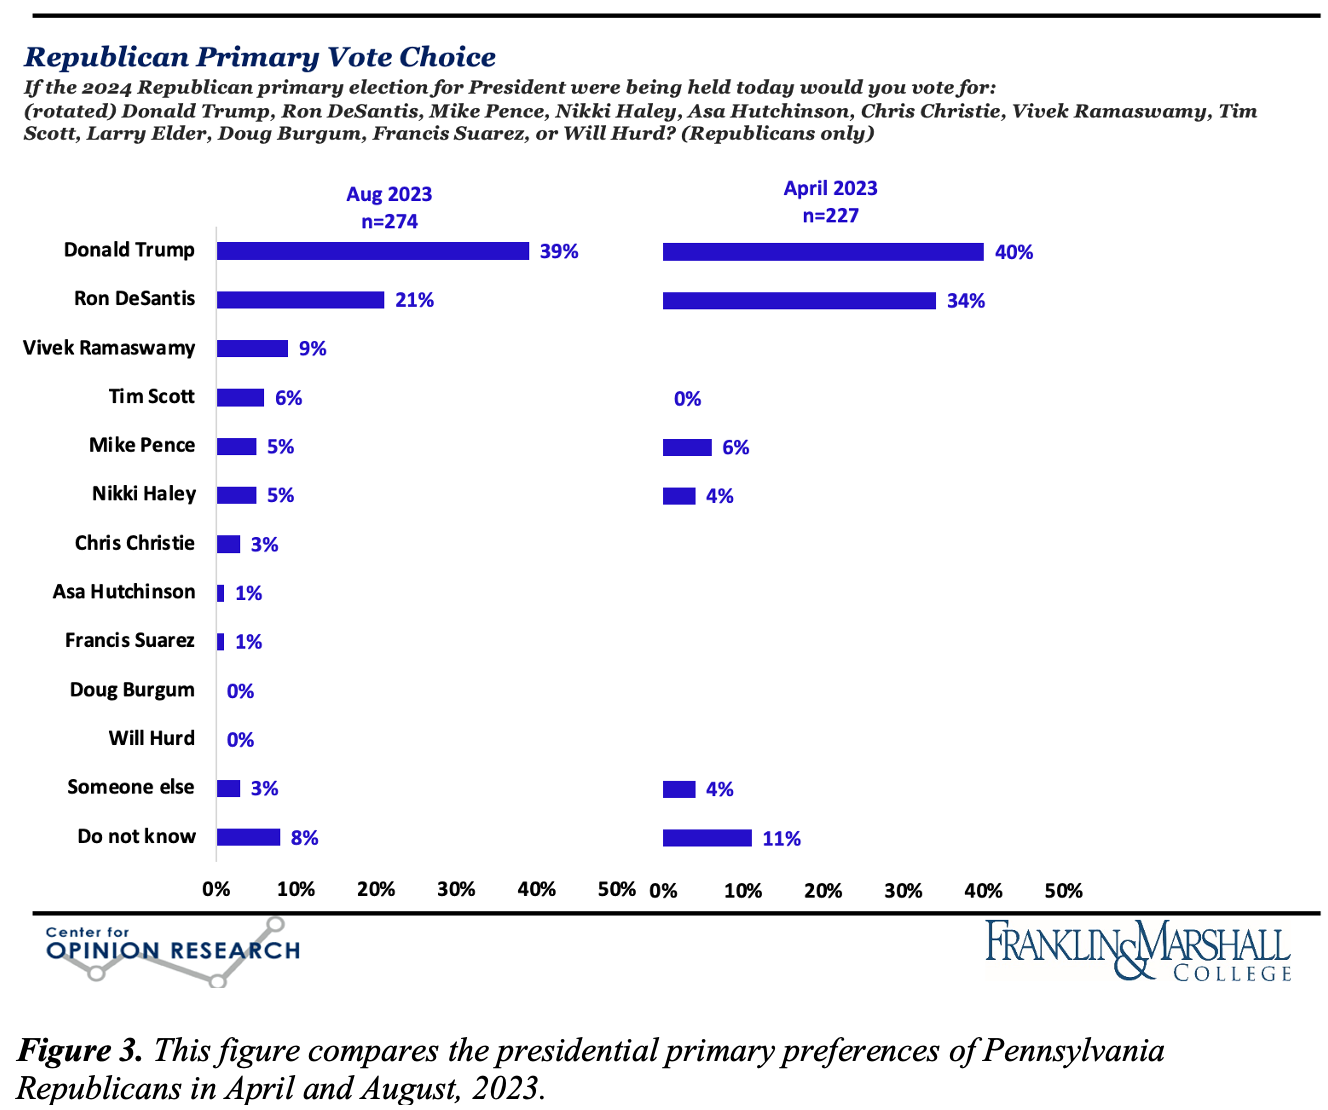 Figure 3. Bar chart comparing the presidential primary preferences of Pennsylvania Republicans in April and August 2023. Candidates listed are Trump, DeSantis, Ramaswamy, Scott, Pence, Haley, and Christy. Other categories are "someone else" and "do not know."